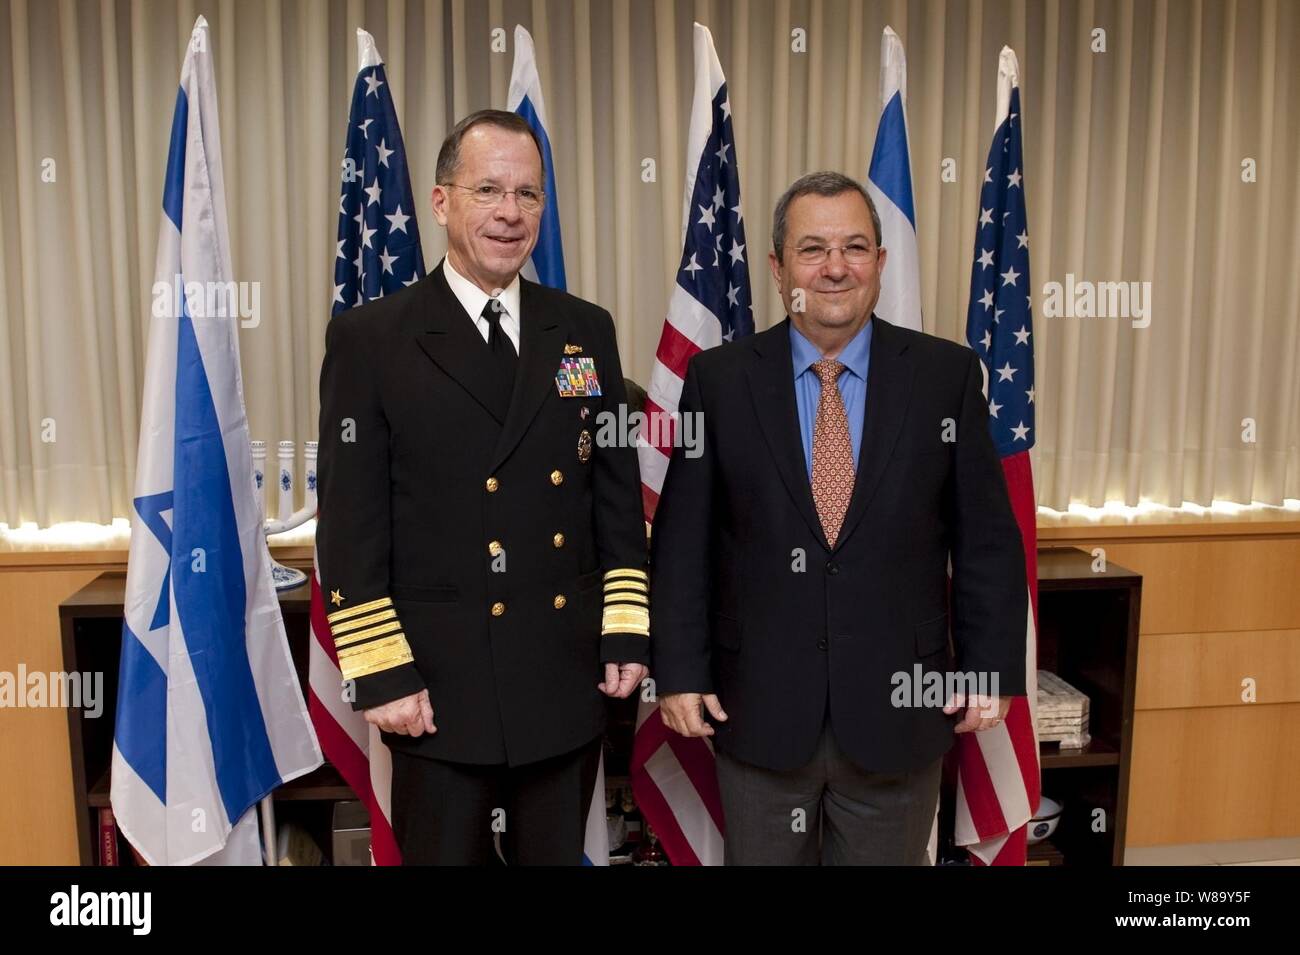 Chairman of the Joint Chiefs of Staff Adm. Mike Mullen, U.S. Navy, poses for photos with Israeli Minister of Defense Ehud Barak in Tel Aviv, Israel, on Feb. 15, 2010.  Mullen is on a weeklong tour of the region visiting with key partners and allies. Stock Photo